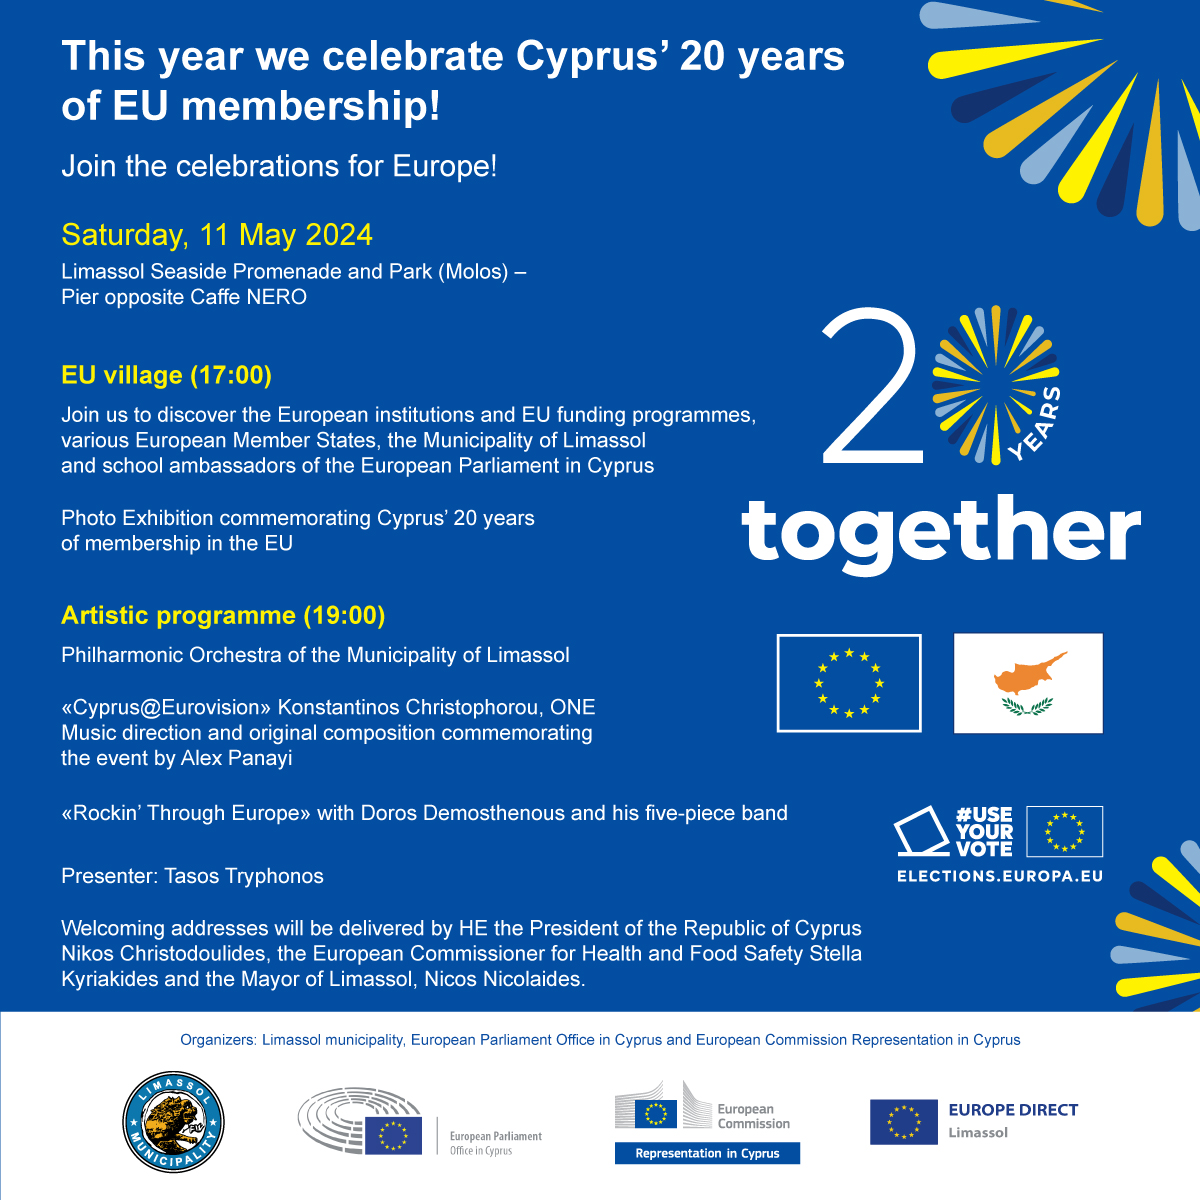 🎉Join us in celebrating Europe Day and the 20 year anniversary of #Cyprus becoming part of the European Union!🇪🇺 Saturday 11 May 2024 from 5pm at the #Limassol Seaside Promenade and Park (Molos).